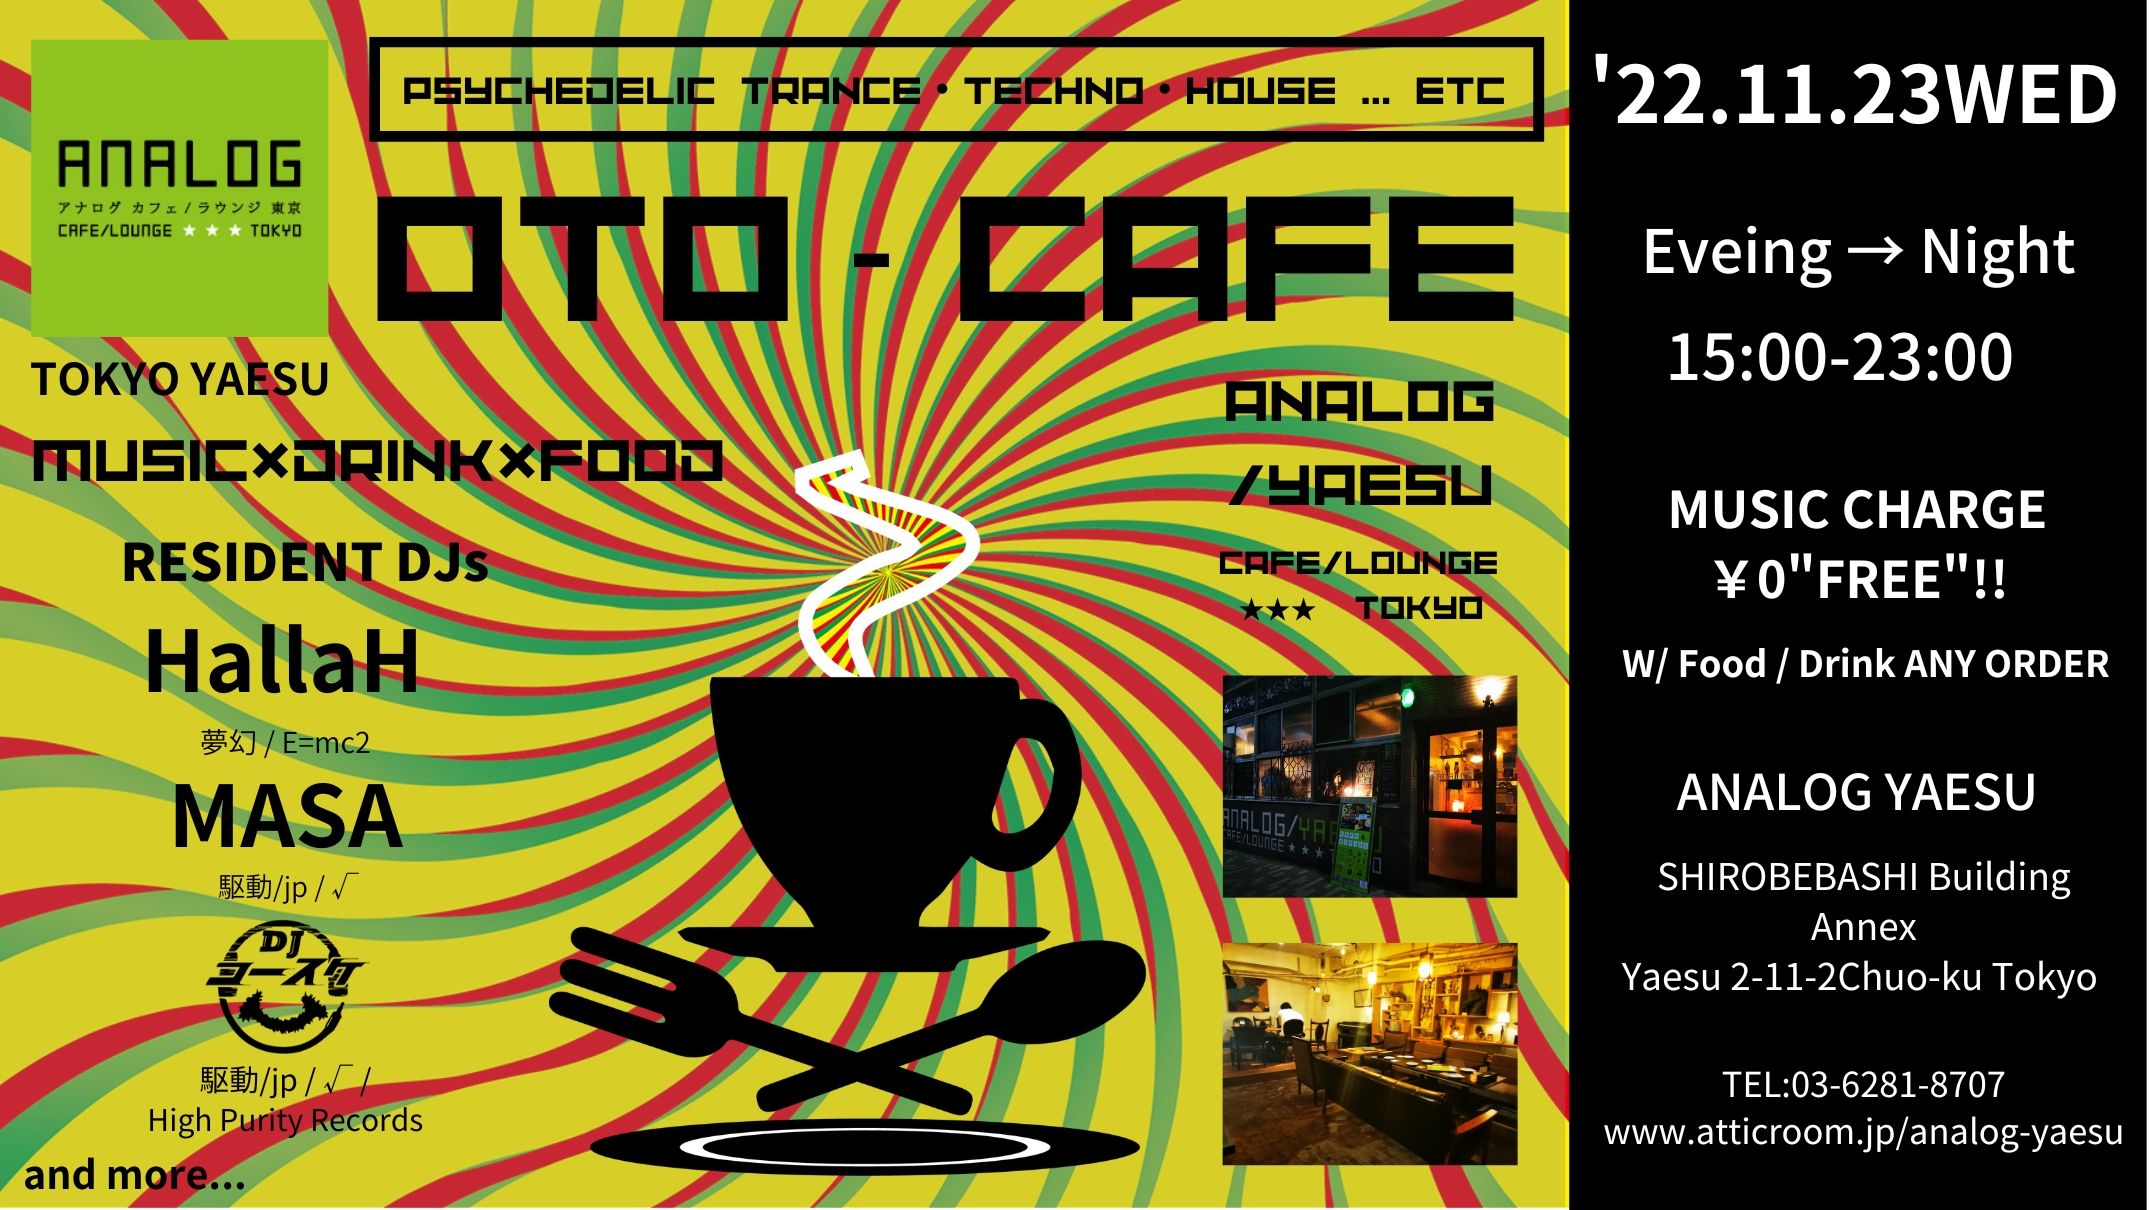 ☆☆☆☆ ENTRANCE：￥0"FREE" ☆☆☆☆ - MUSIC×DRINK×FOOD PROJECT - 【 OTO-CAFE Vol.4・11.23WED祝 EVENING to NIGHT @ Analog Yaesu | Tokyo Station 】